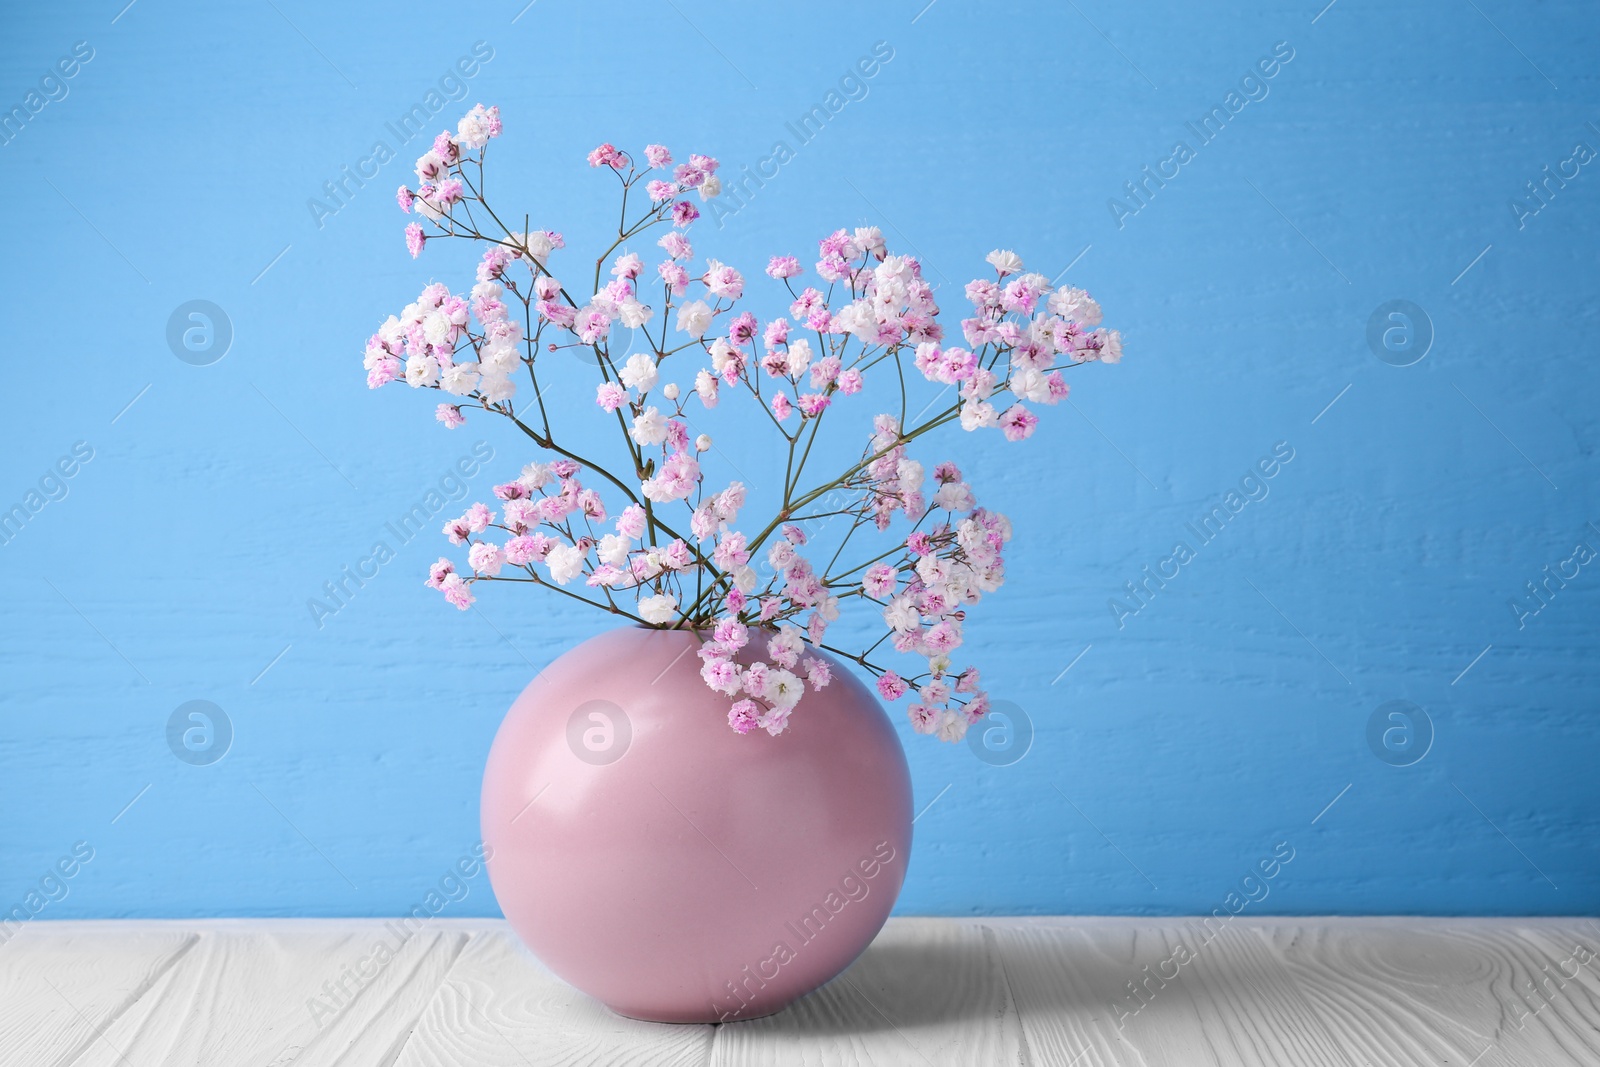 Photo of Beautiful dyed gypsophila flowers in pink vase on white wooden table against light blue background